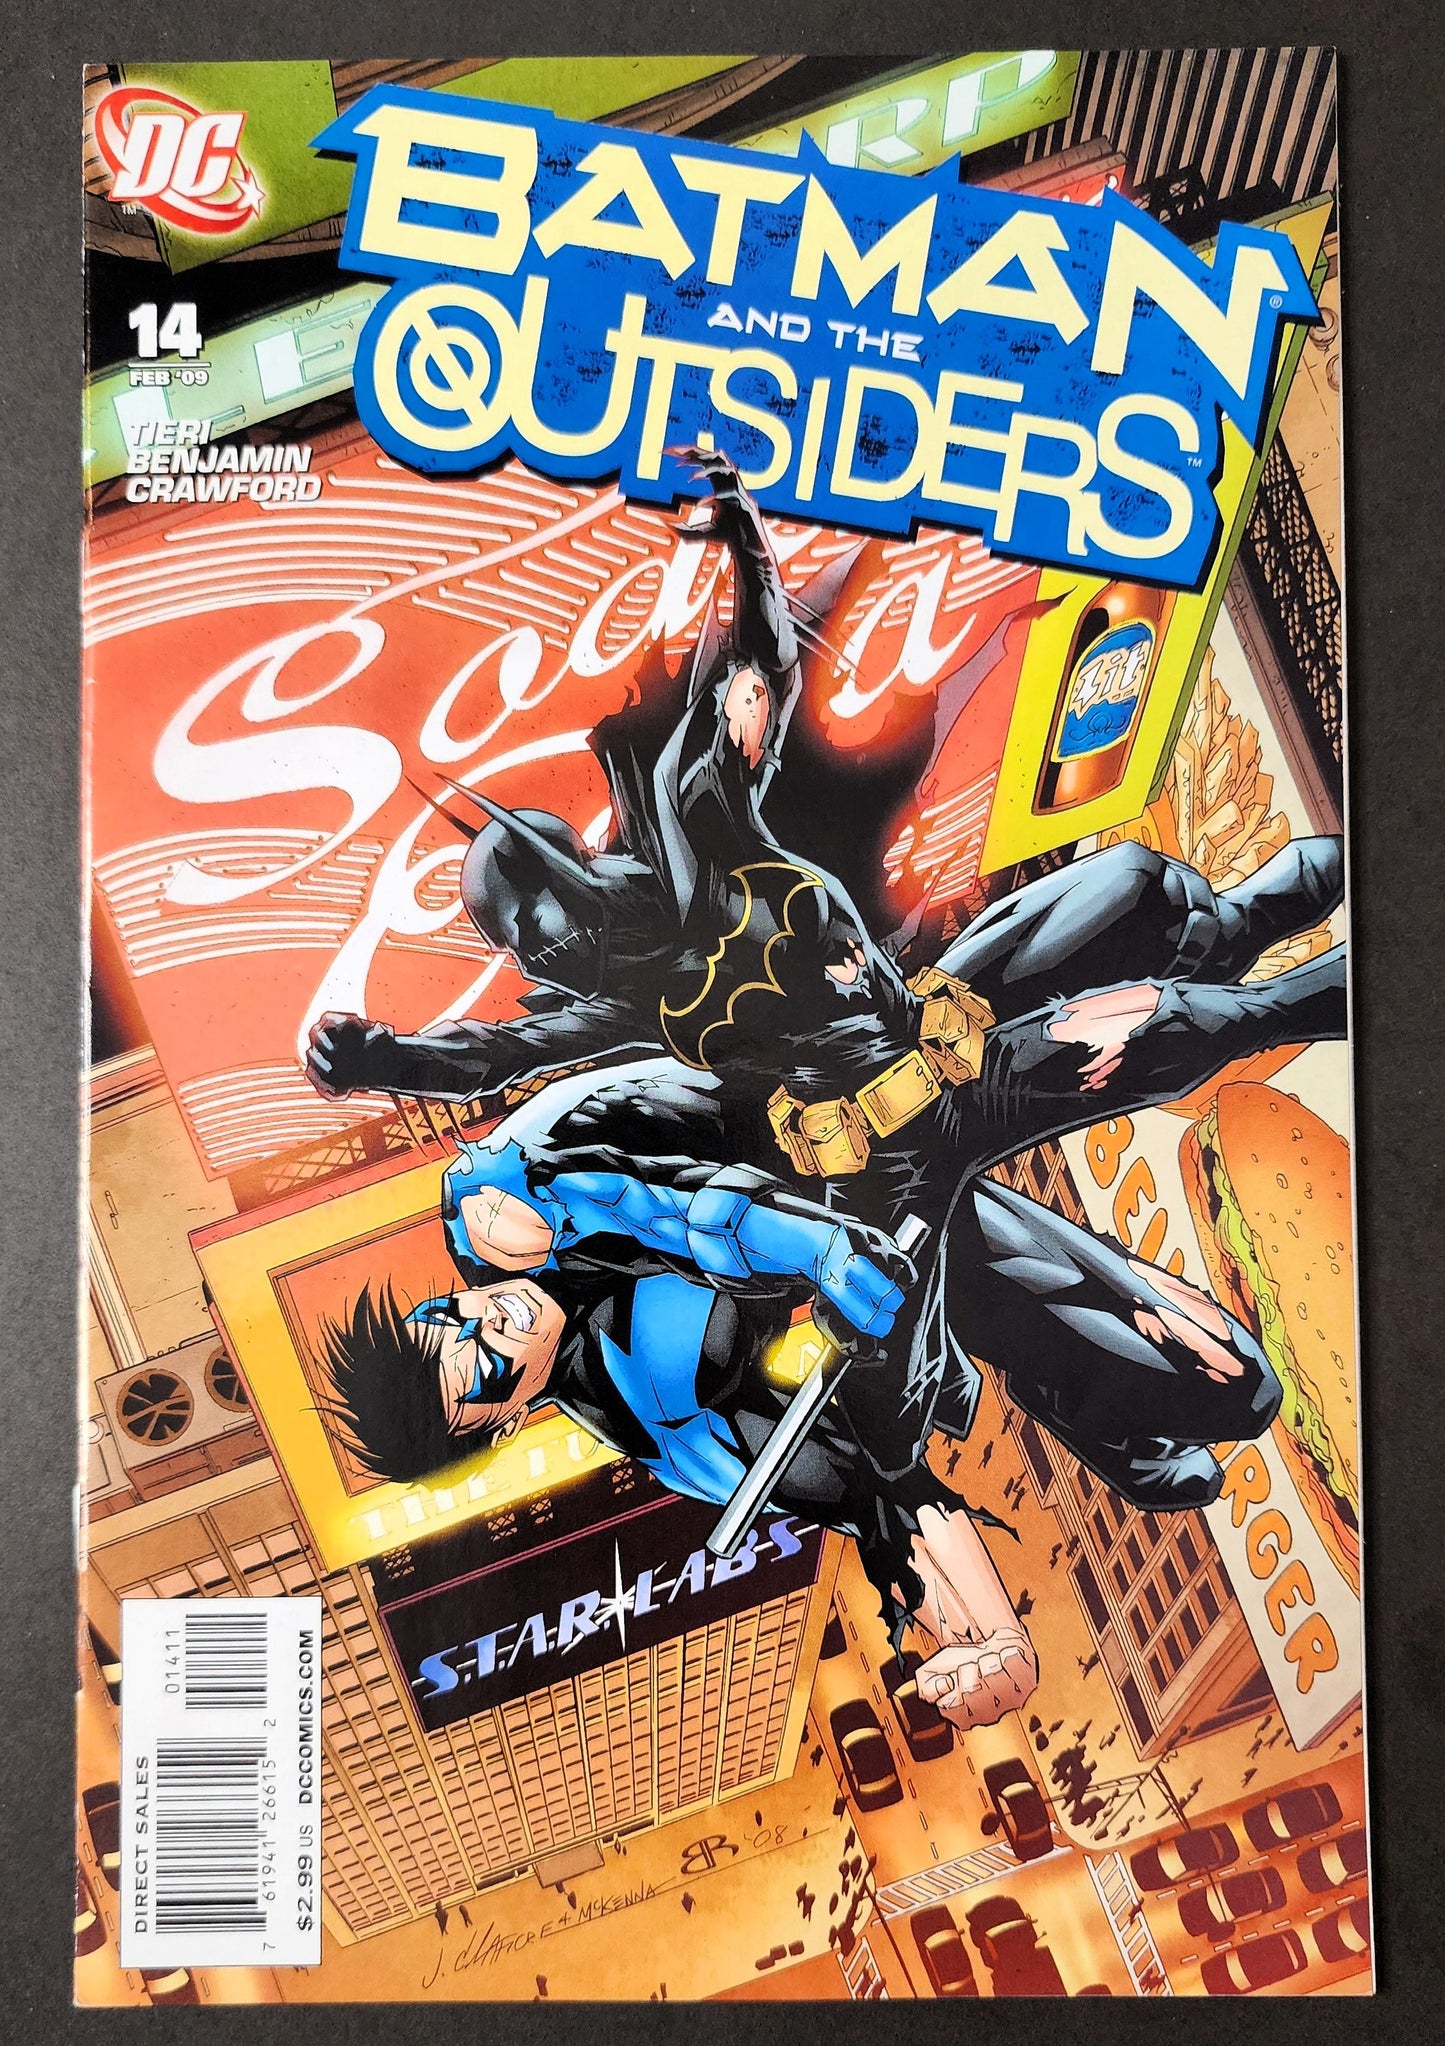 Batman and the Outsiders (Vol. 2) #14 (FN+)